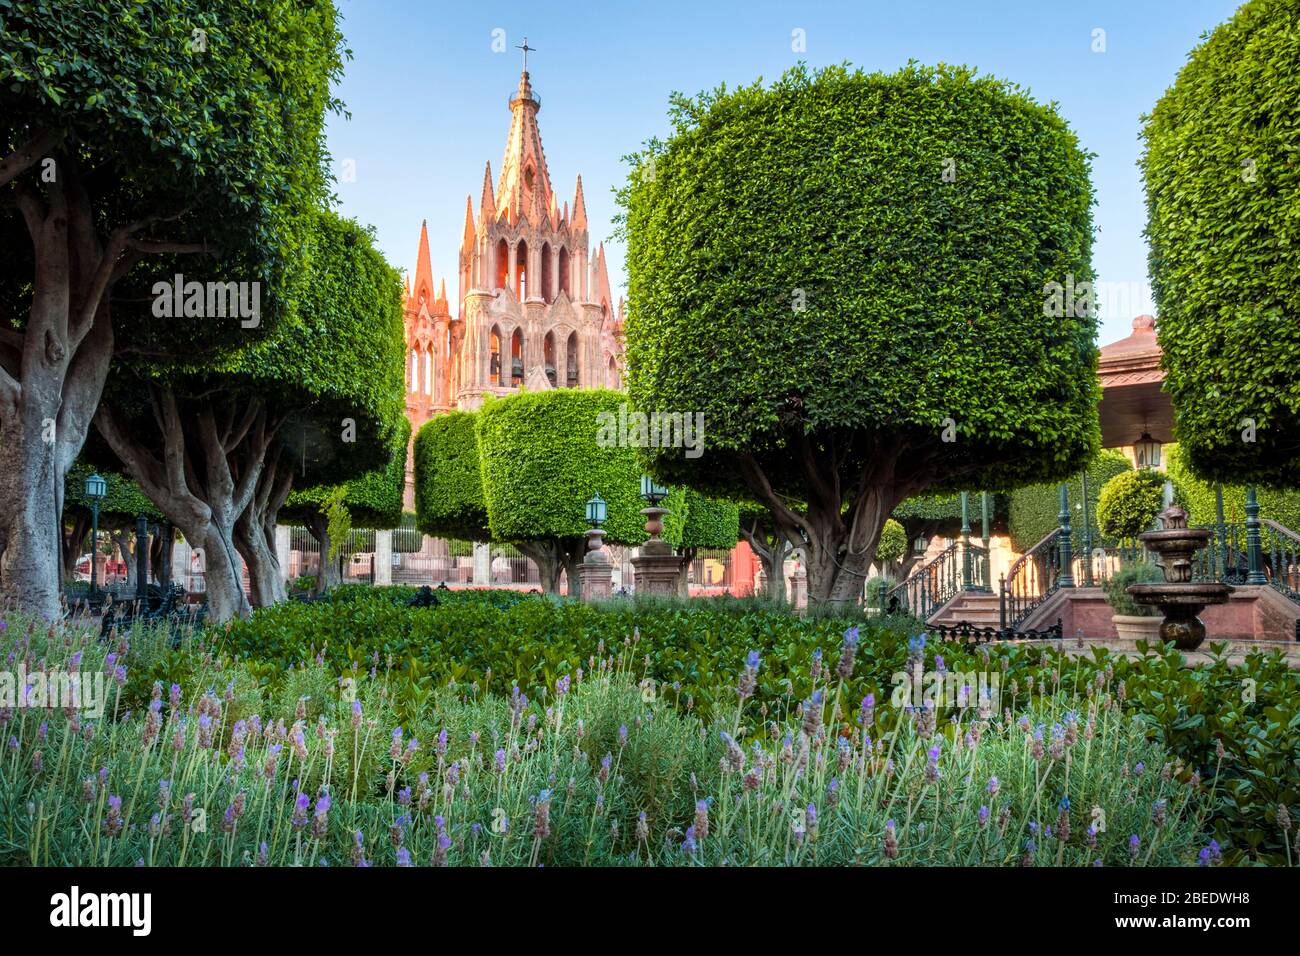 Plaza and iconic church in the historic downtown of San Miguel de Allende, Mexico. Stock Photo